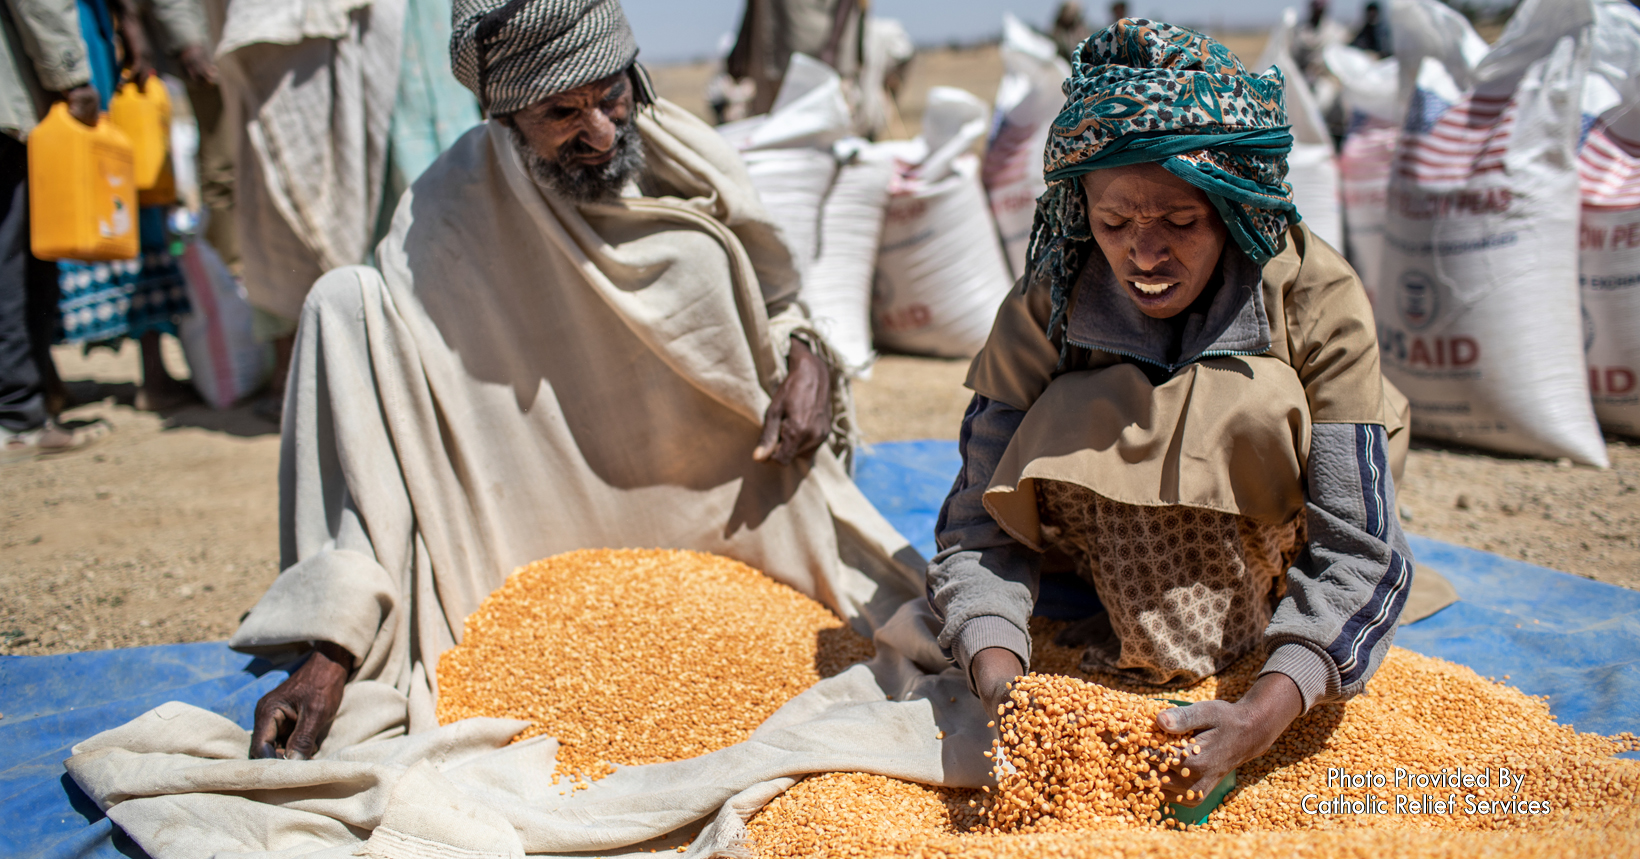 A scooper distributes a ration of yellow split peas to a beneficiary at a distribution point in Hawzen District of Tigray, Ethiopia.